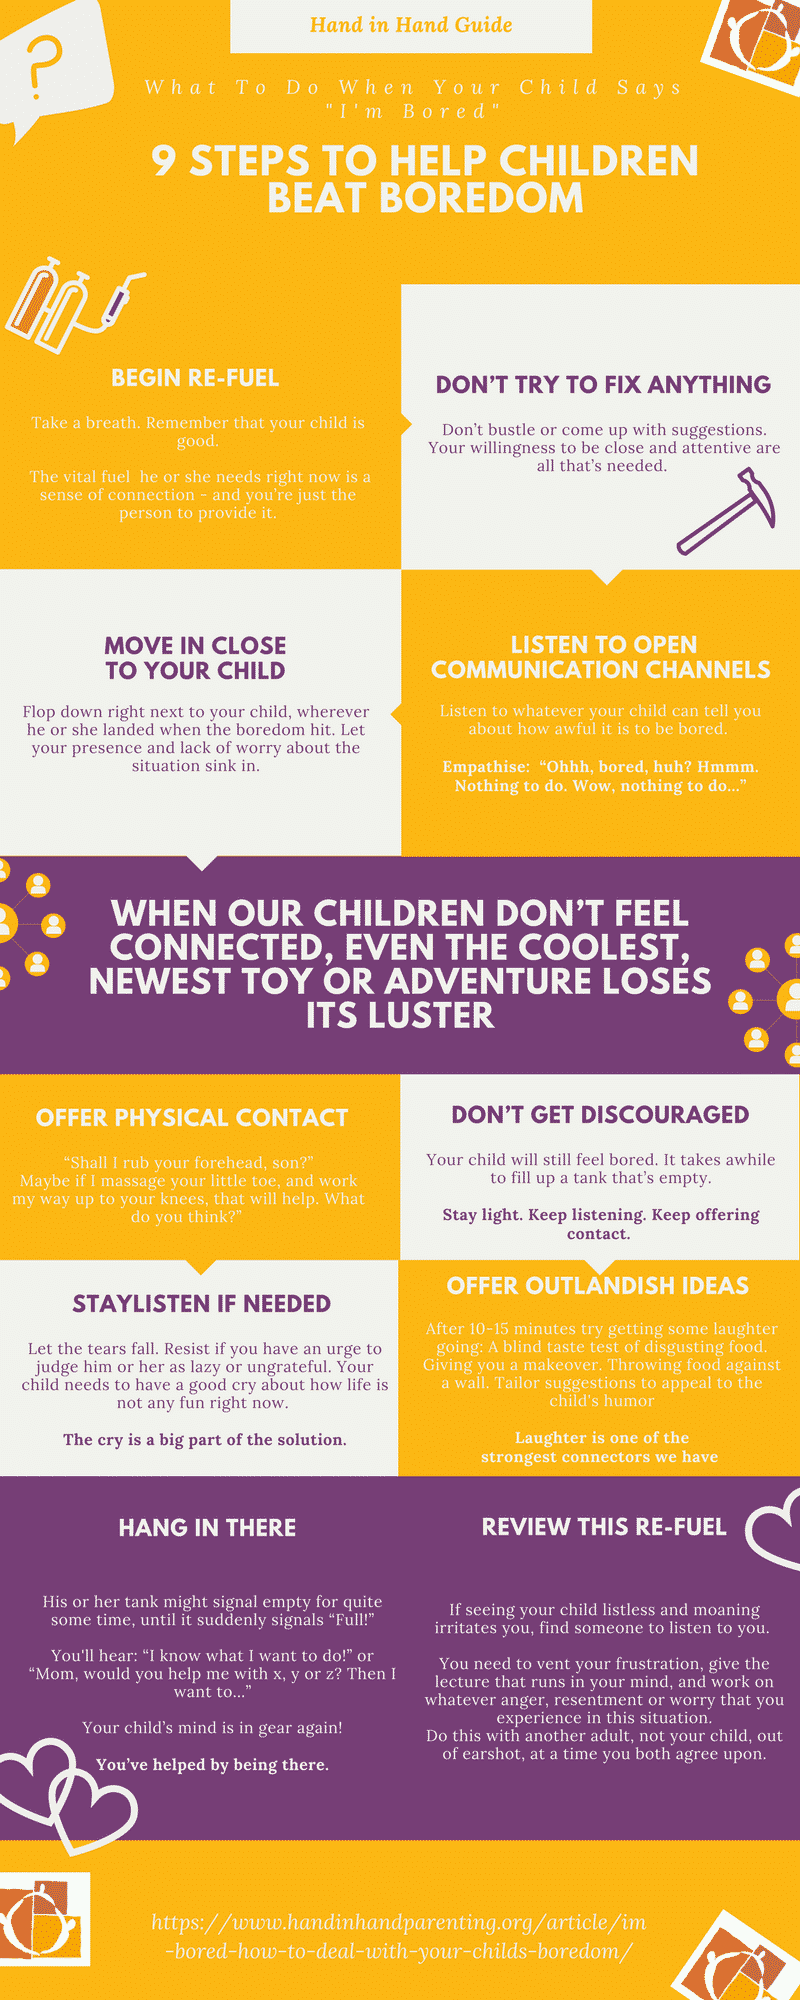 9 connecting ways to help you move through boredom with your child